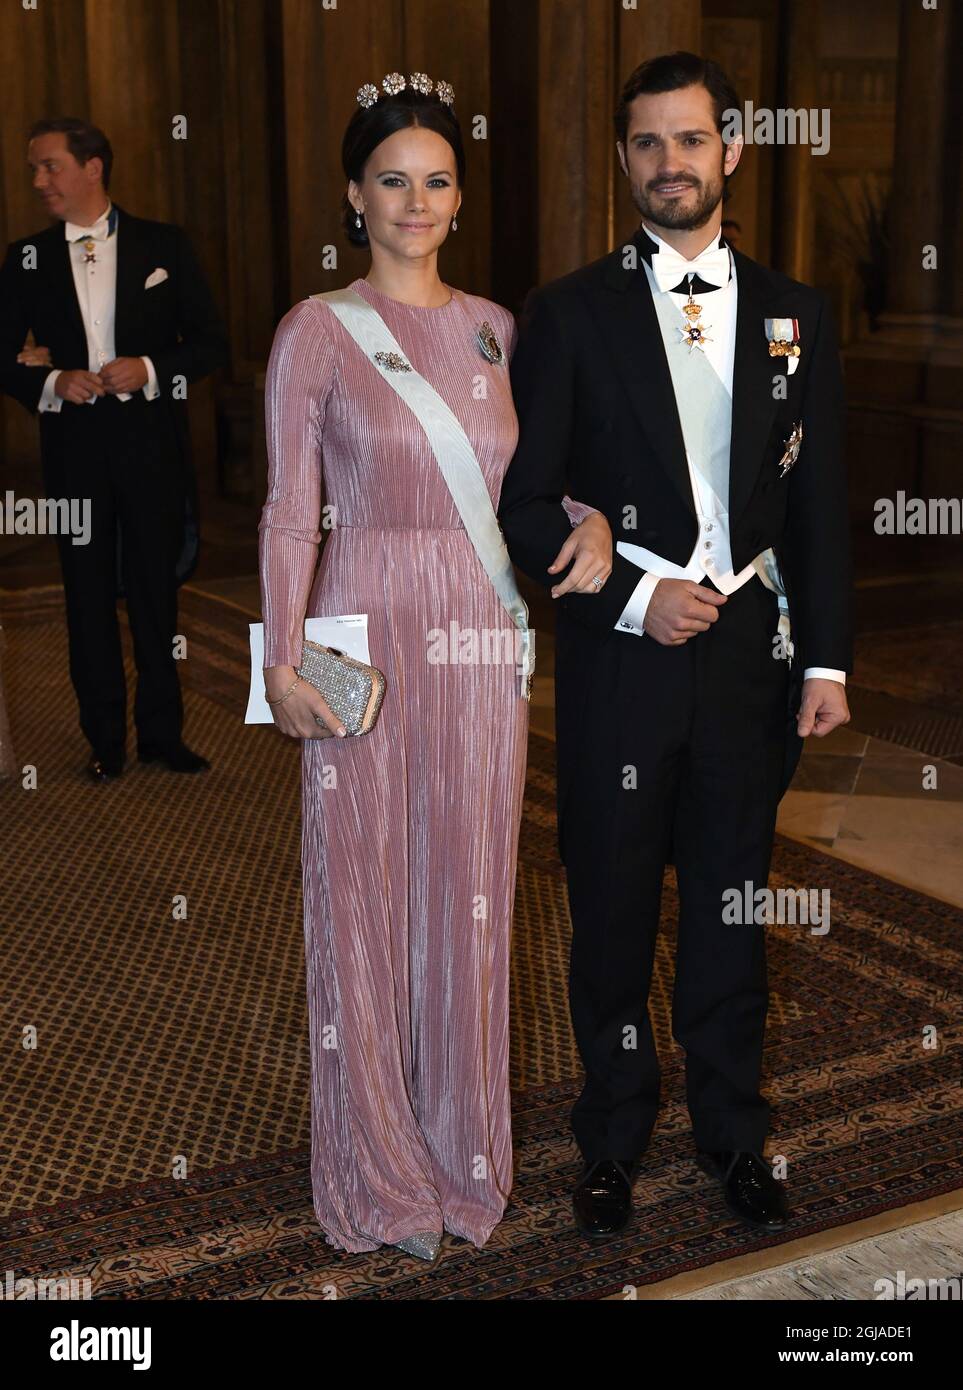 STOCKHOLM 2016-12-11 Princess Sofia and Prince Carl Philip arrive to the  Swedish King and Queen's dinner for the Nobel laureates at the Royal Palace  in Stockholm, Sweden, December 11, 2016. Photo: Jessica